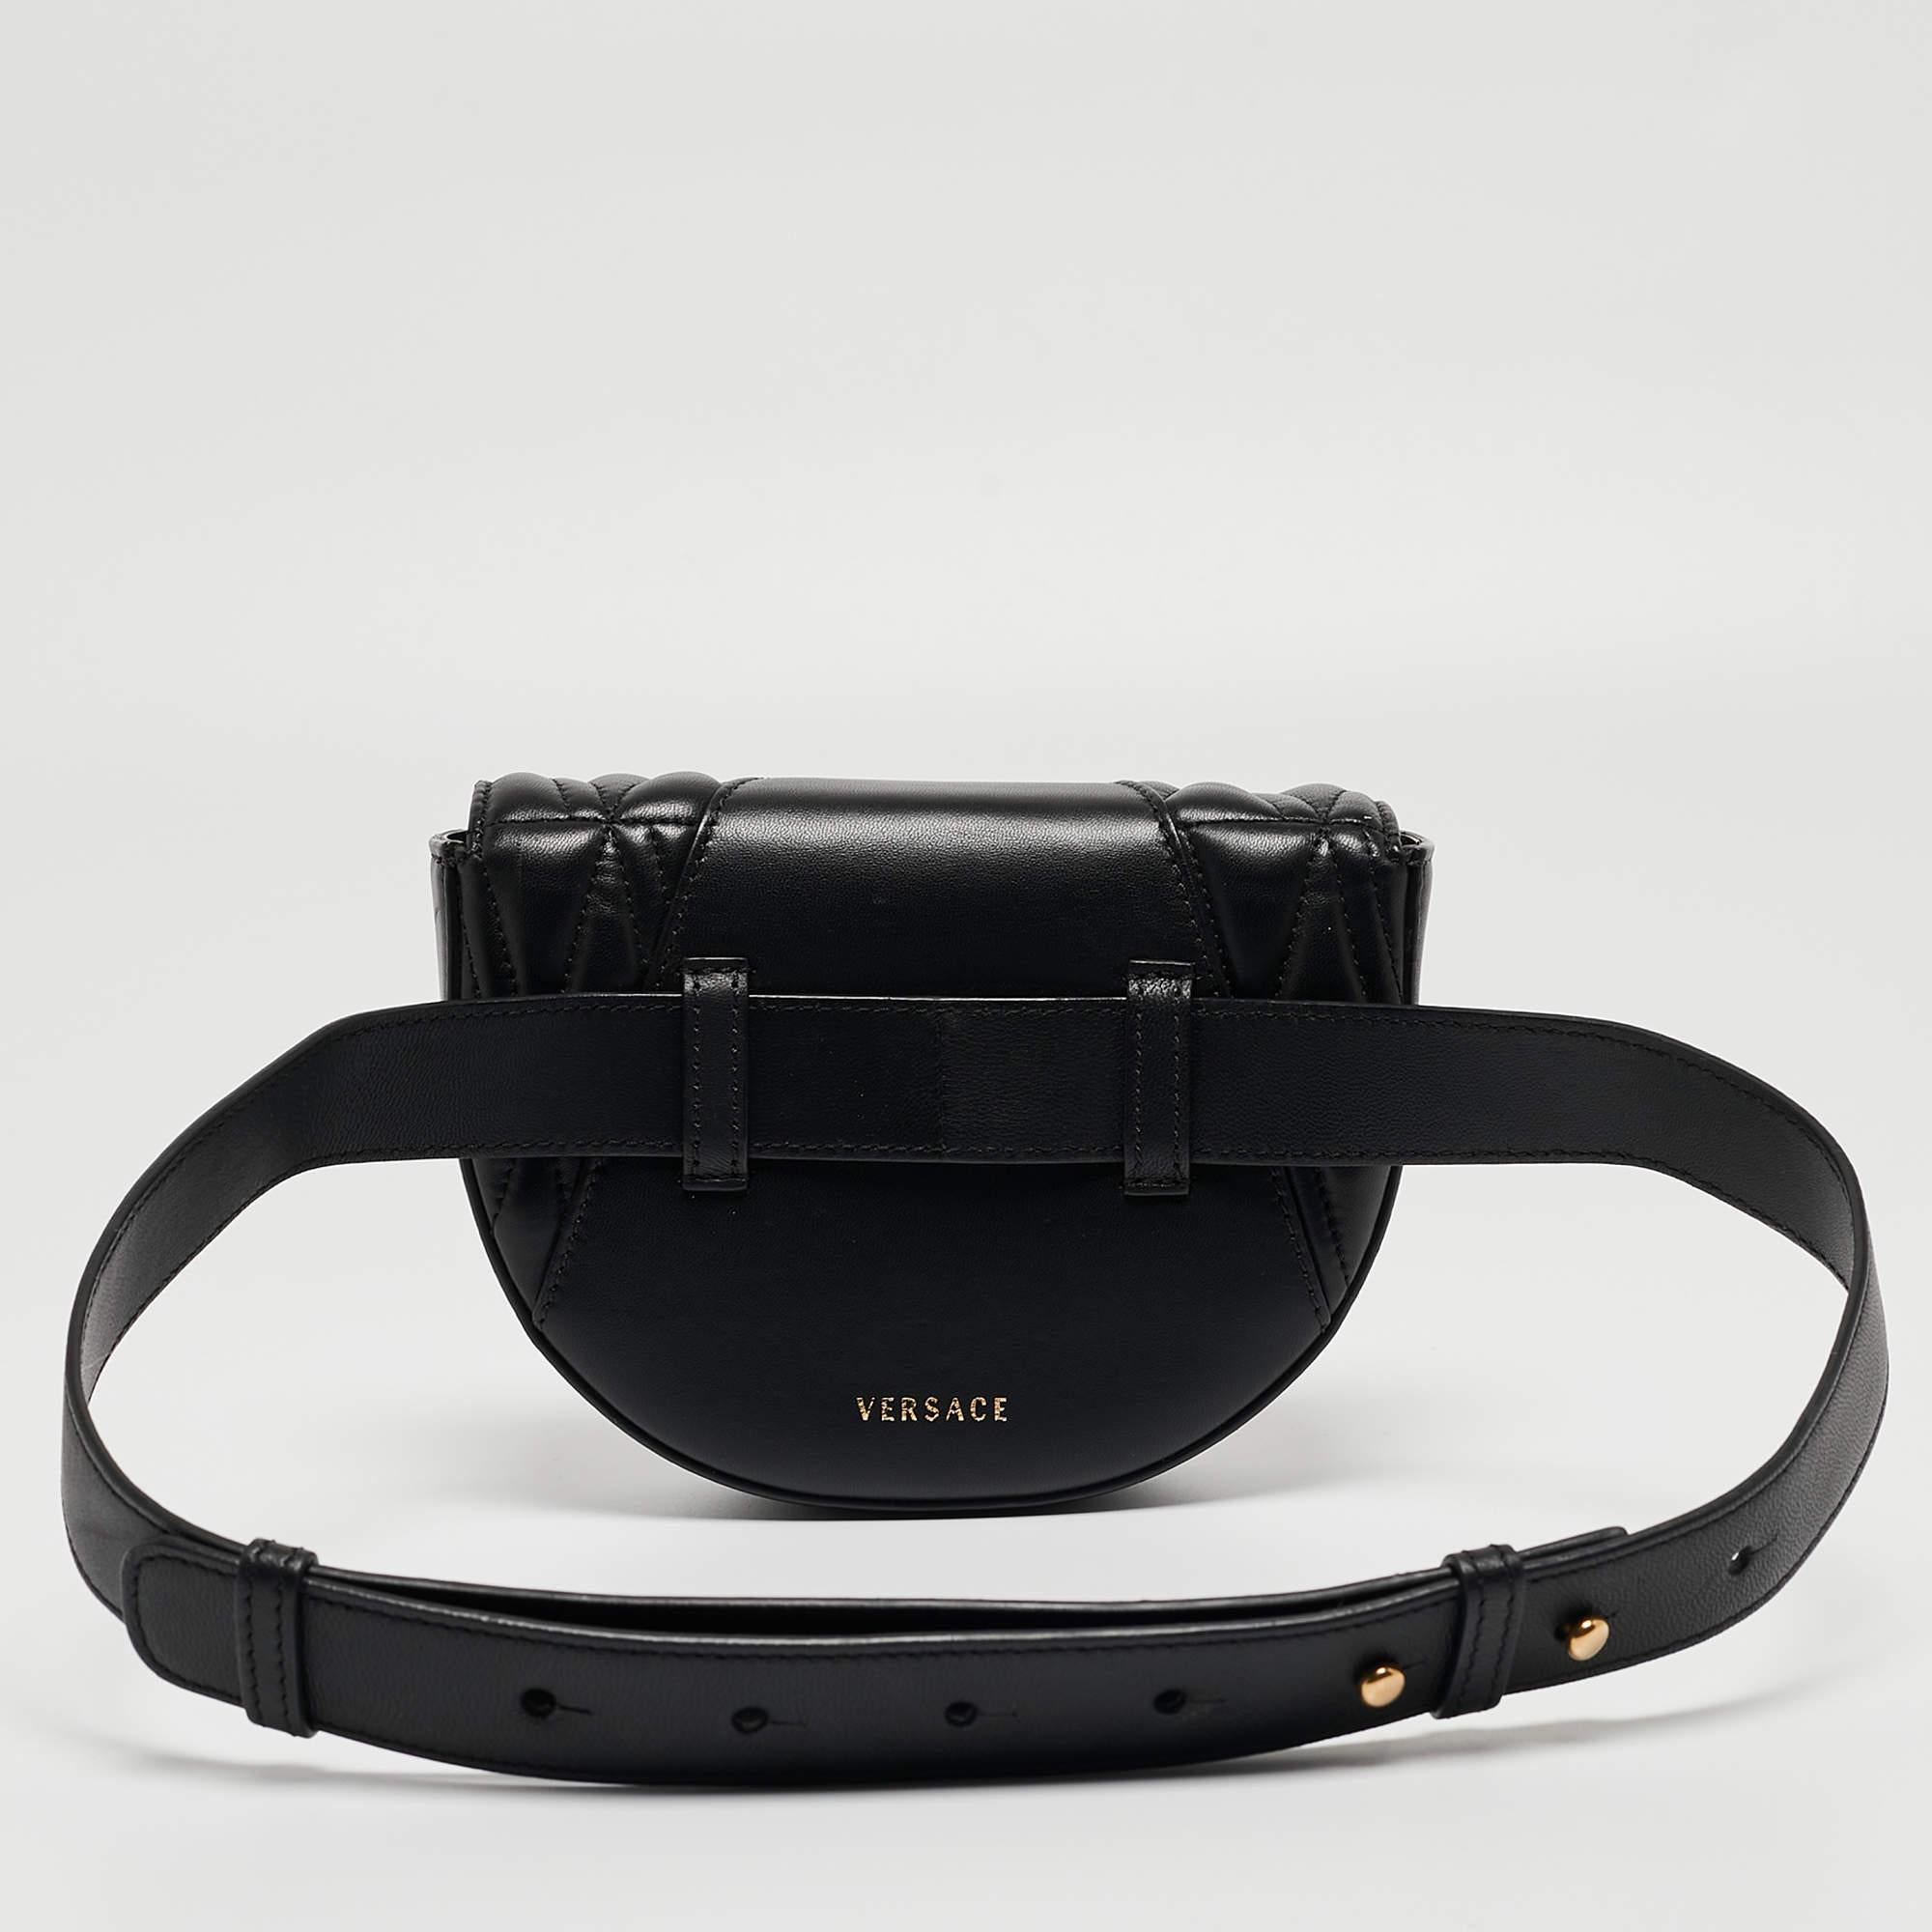 Belt bags are edgy, stylish and will never disappoint you when it comes to completing an outfit! This one is crafted wonderfully with a smart exterior, a compact, well-lined interior, and an adjustable belt that sits perfectly on your waist. Get